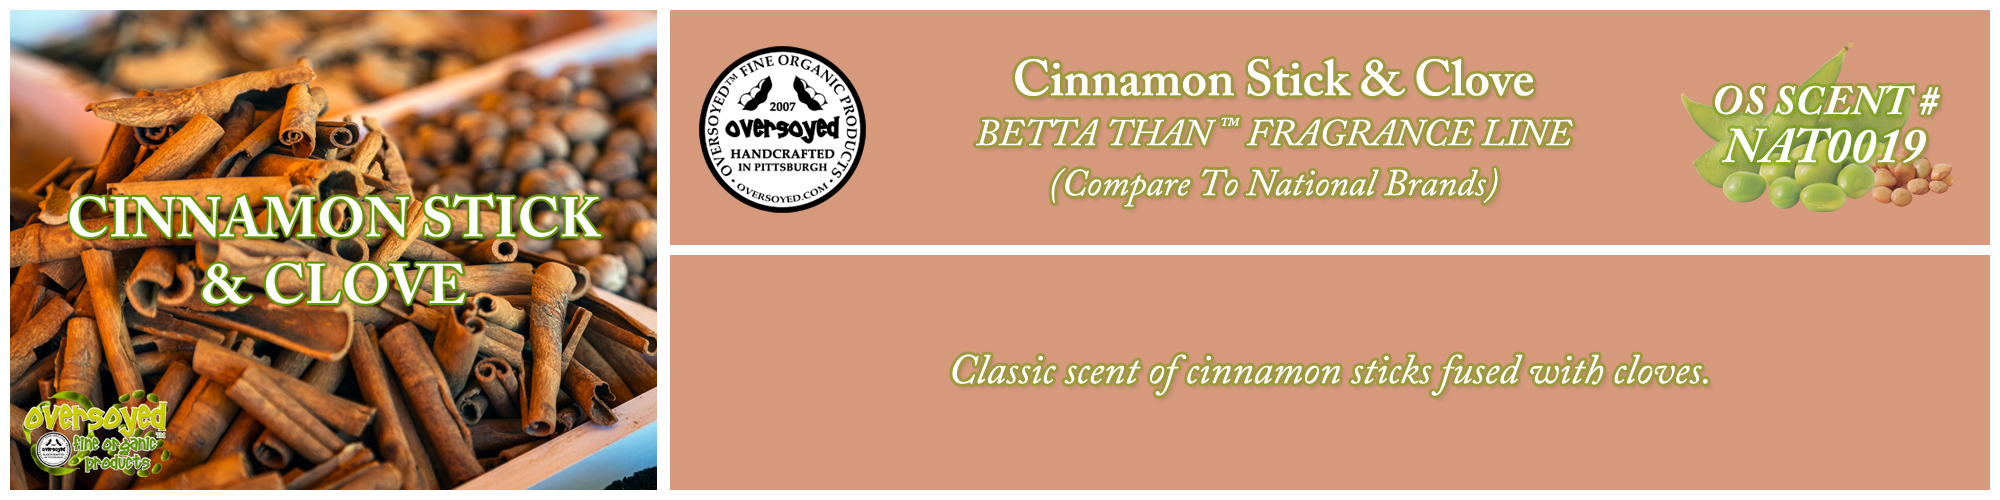 Cinnamon Stick & Clove Handcrafted Products Collection